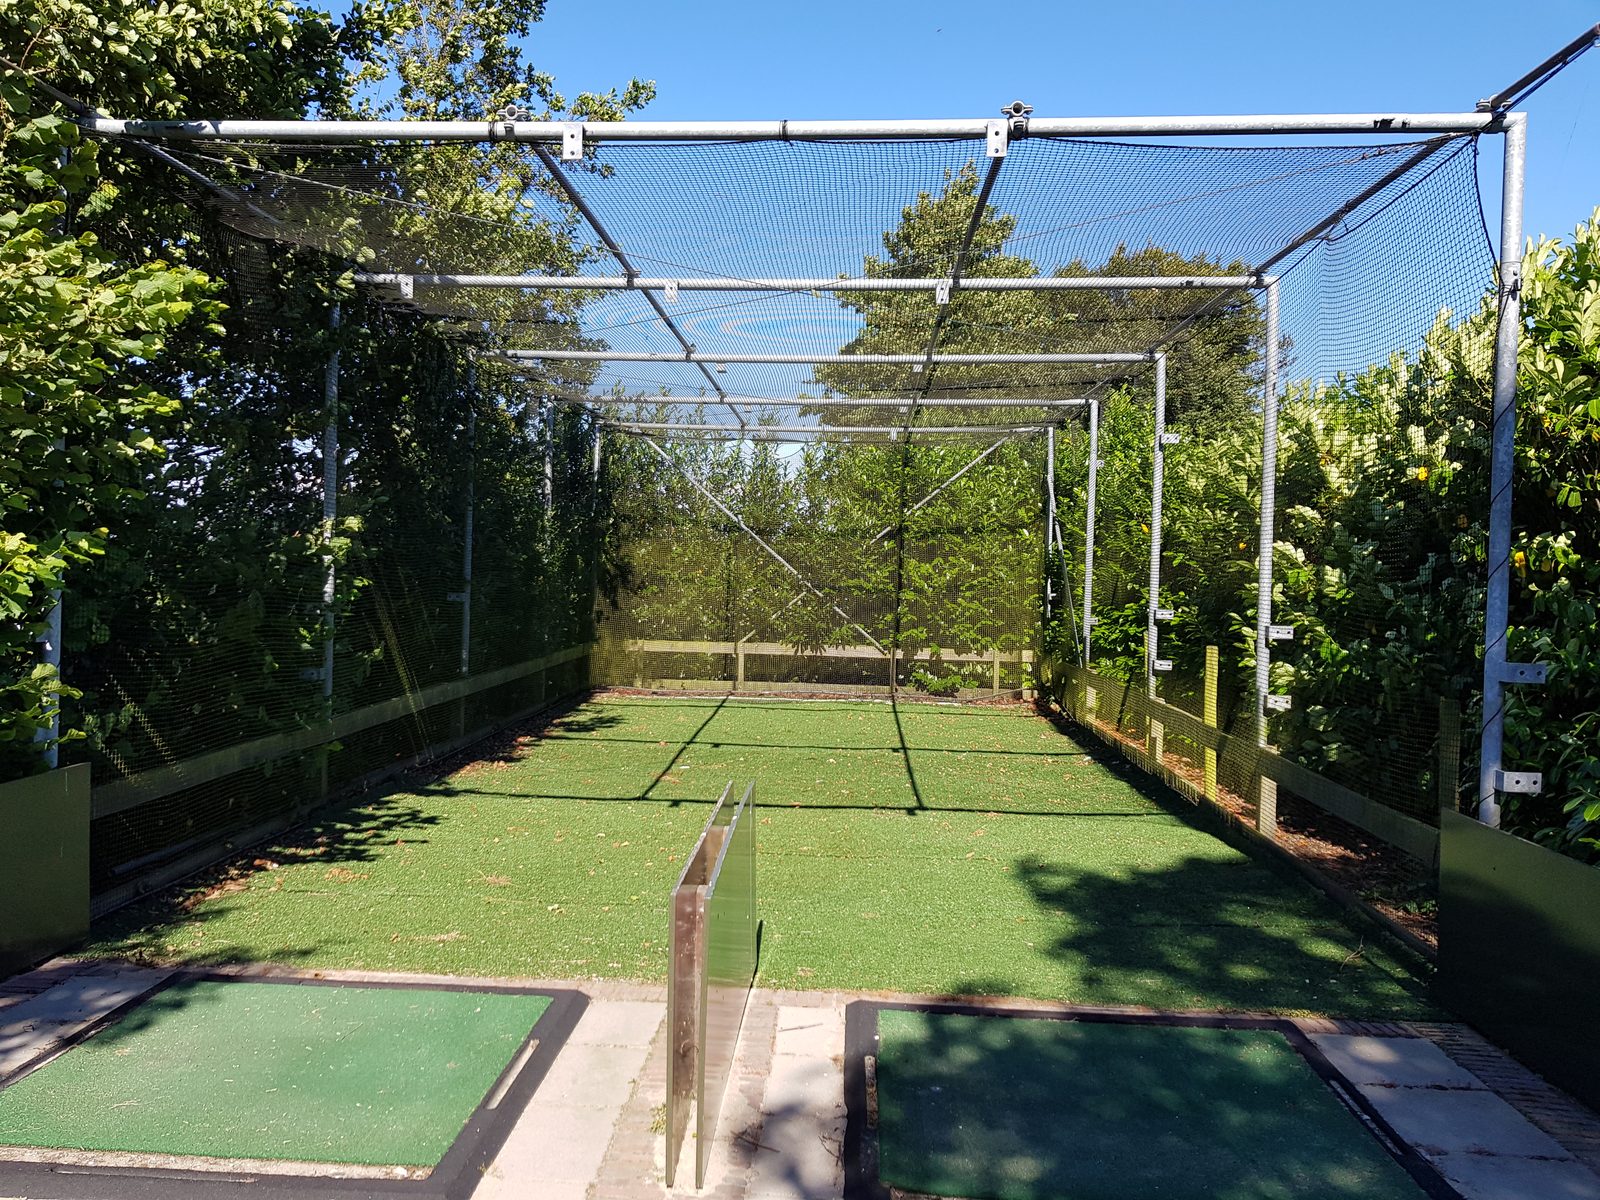 Two golf driving practice cages